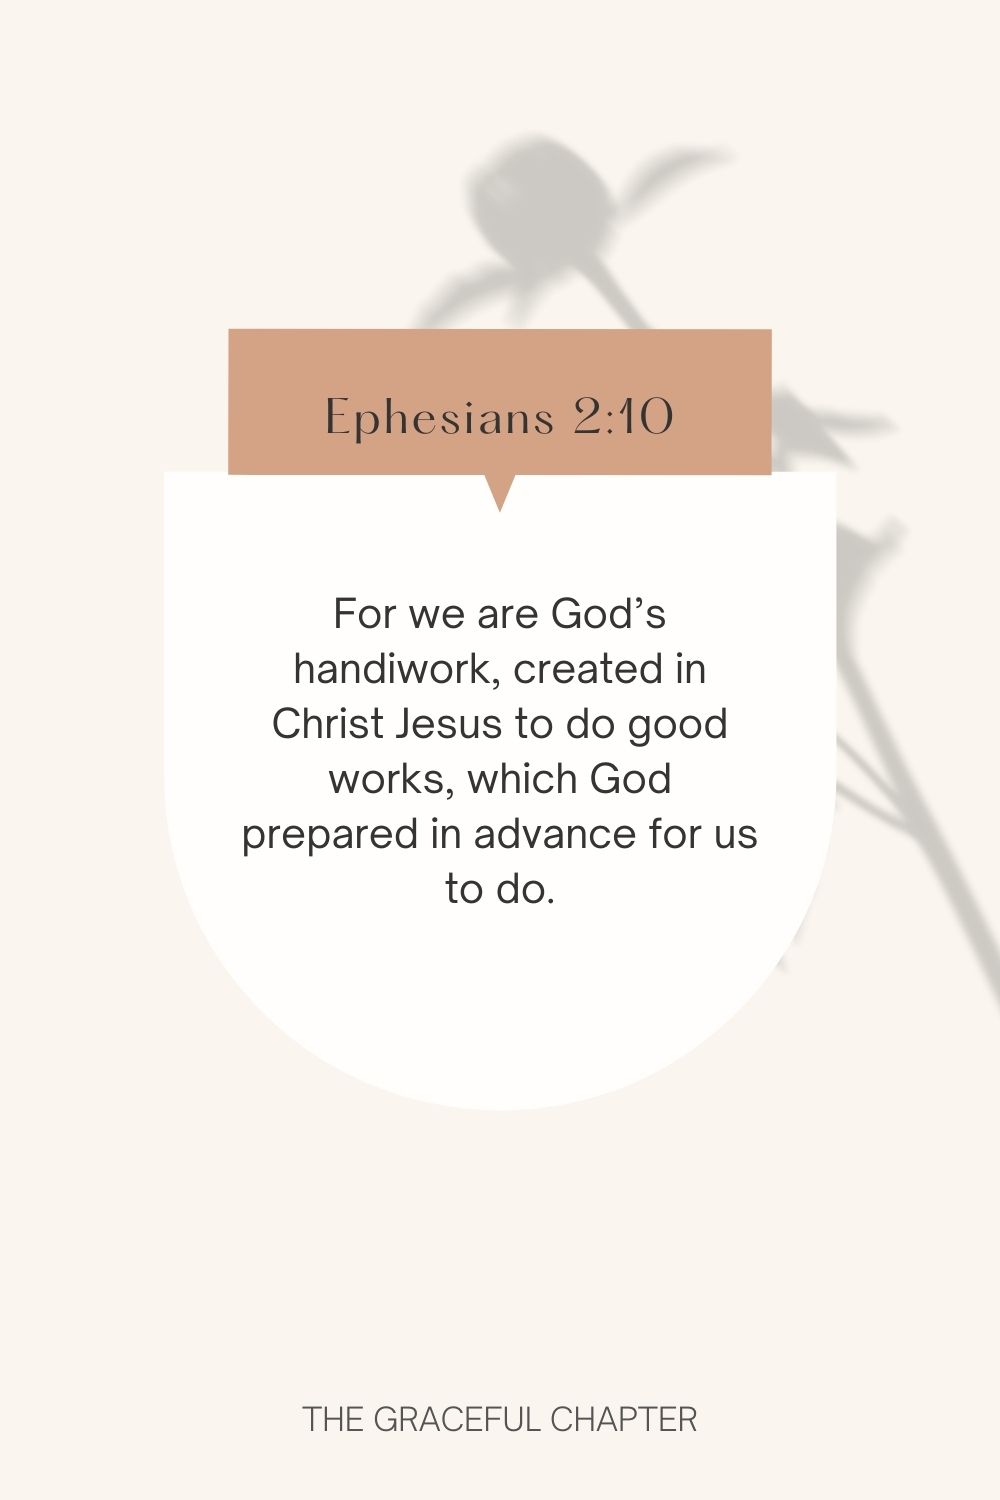 For we are God’s handiwork, created in Christ Jesus to do good works, which God prepared in advance for us to do. Ephesians 2:10